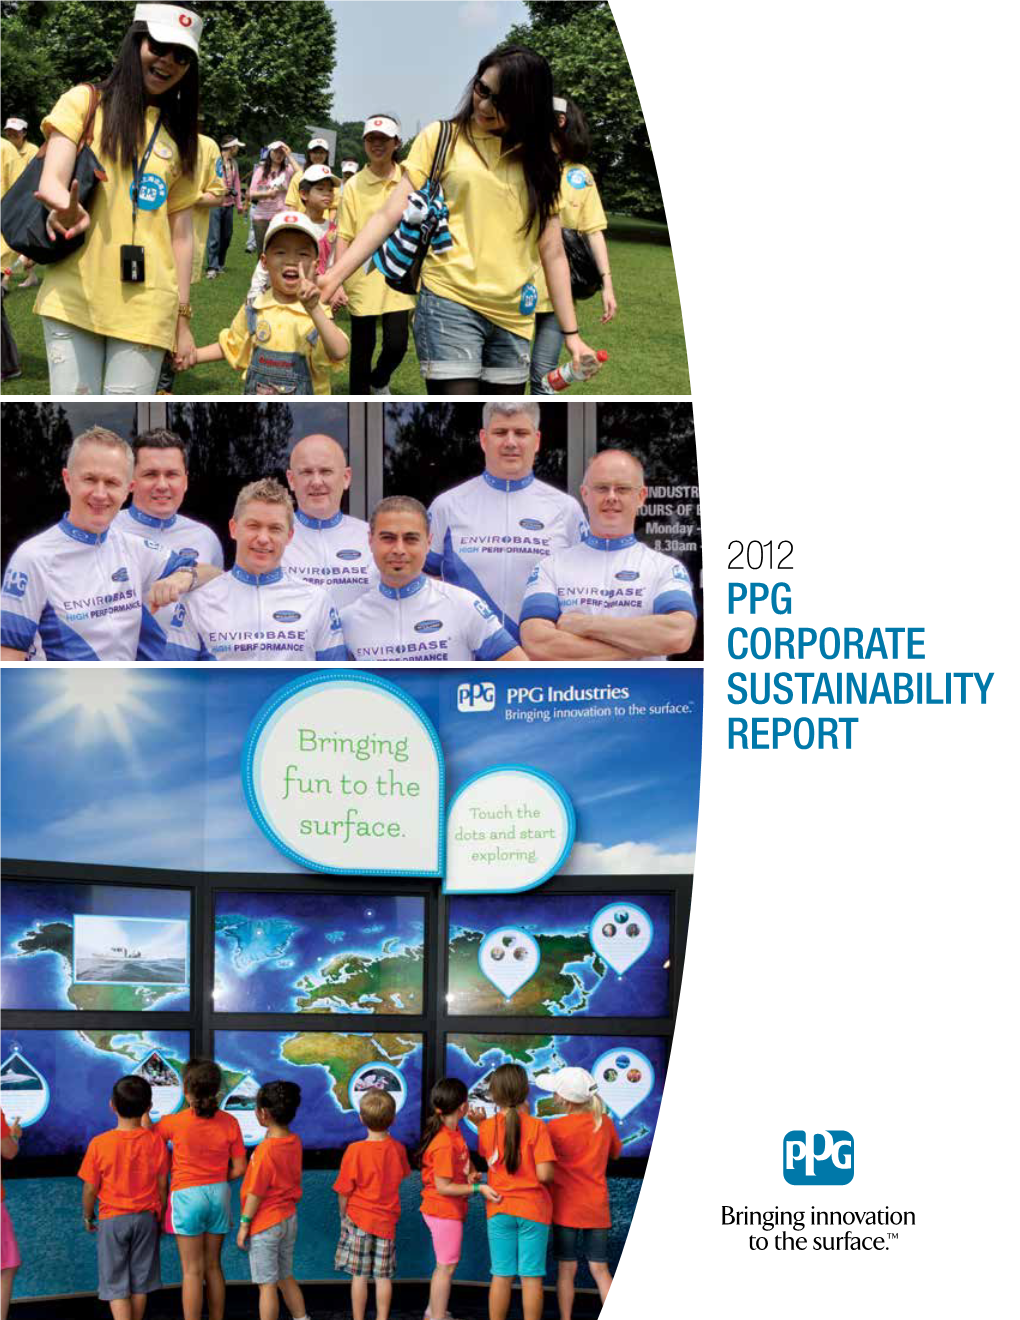 PPG Corporate Sustainability Report